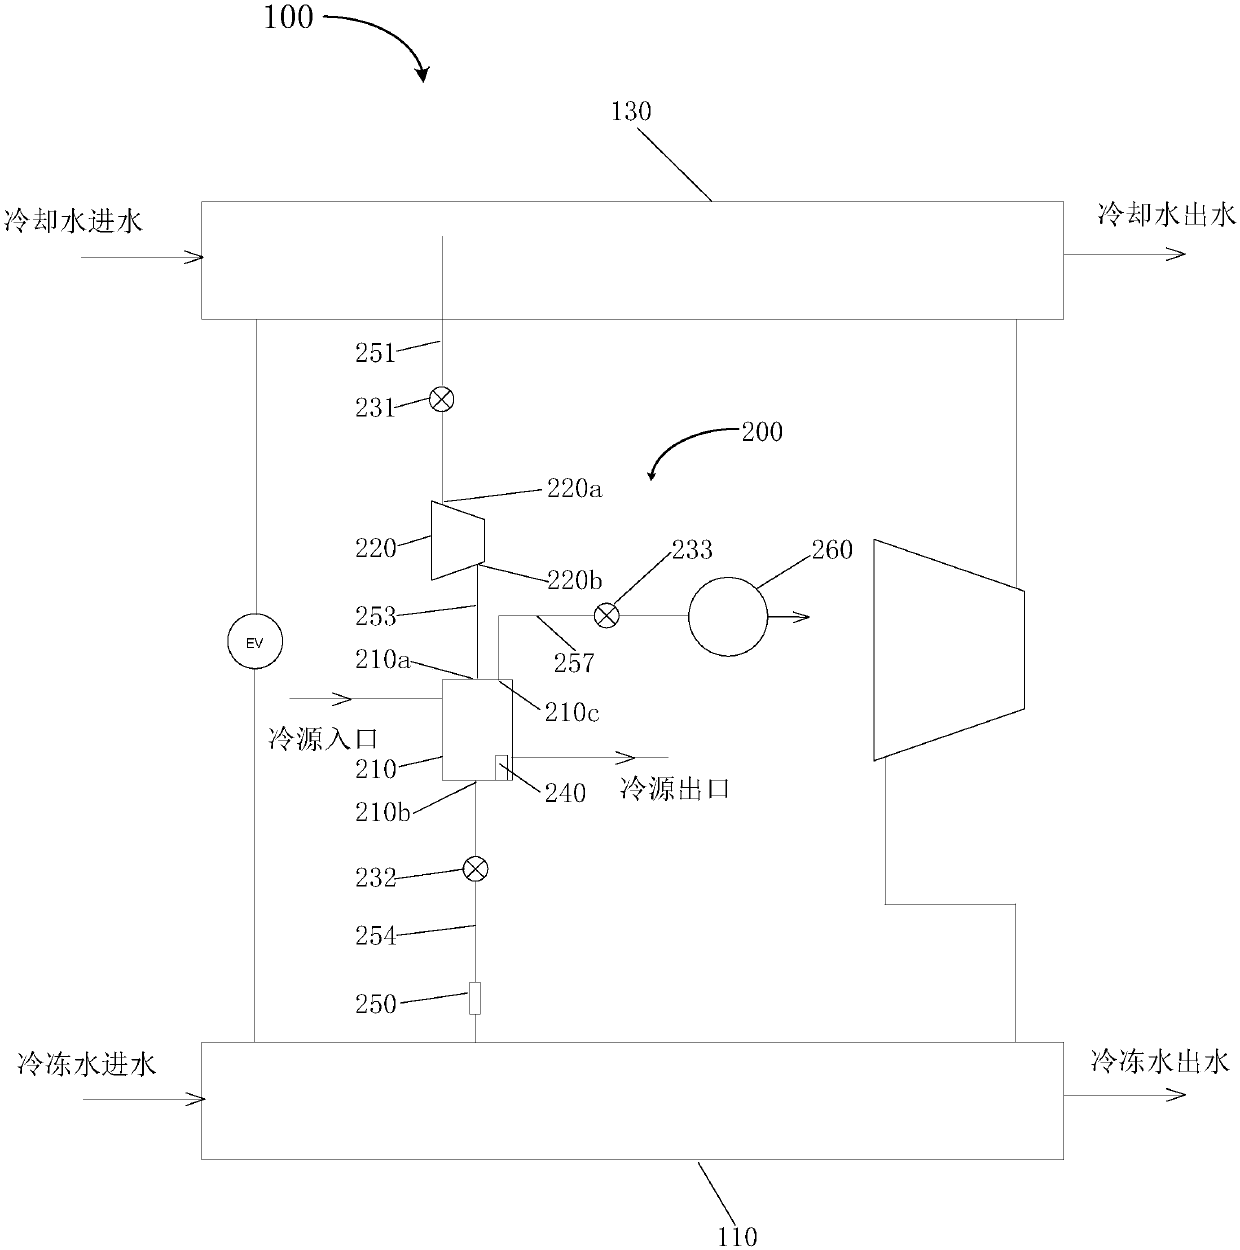 Exhaust device, refrigerating air-conditioning unit and non-condensable gas exhaust method